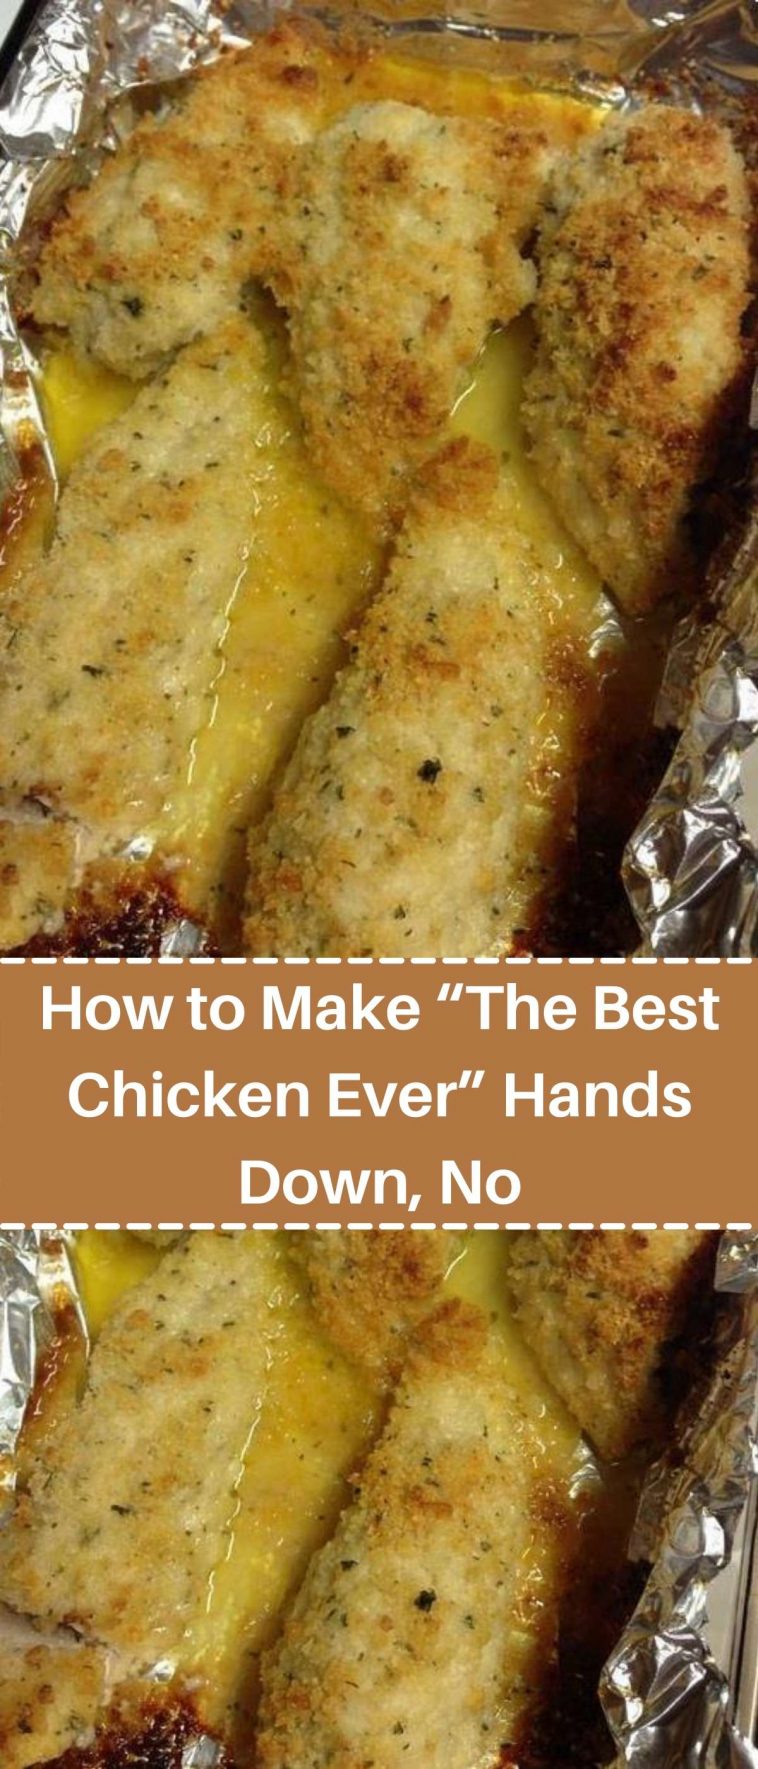 How to Make “The Best Chicken Ever” Hands Down, No Lie